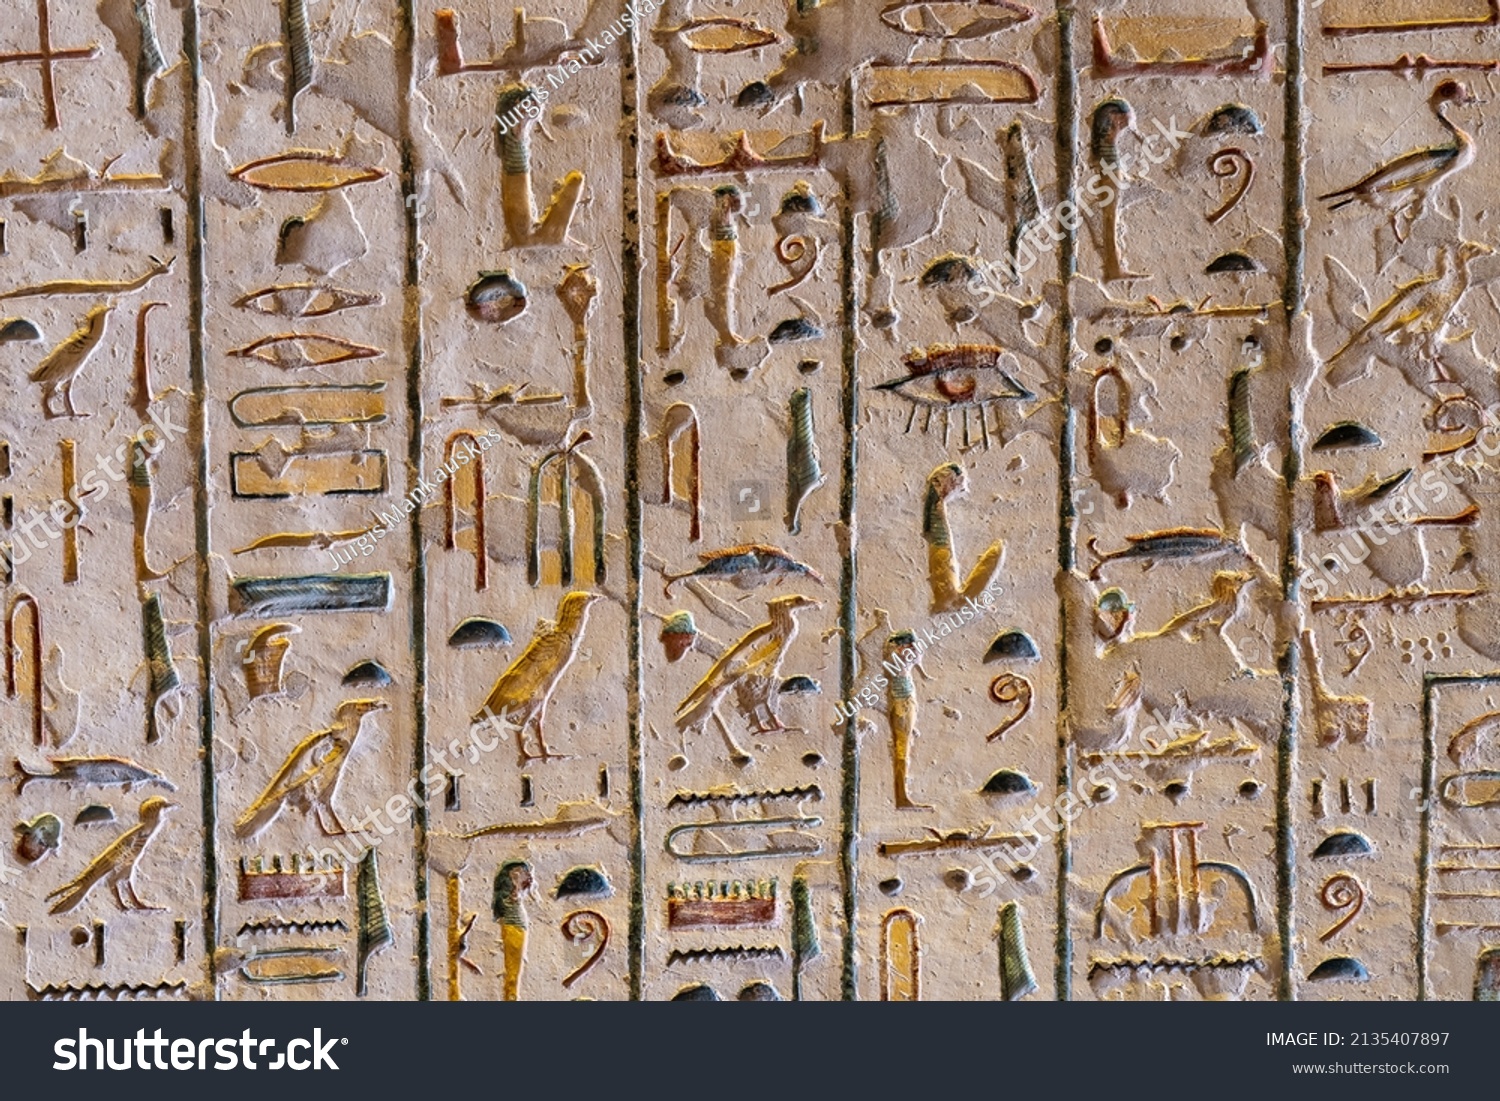 Ancient color egypt images and hieroglyphics on wall #2135407897